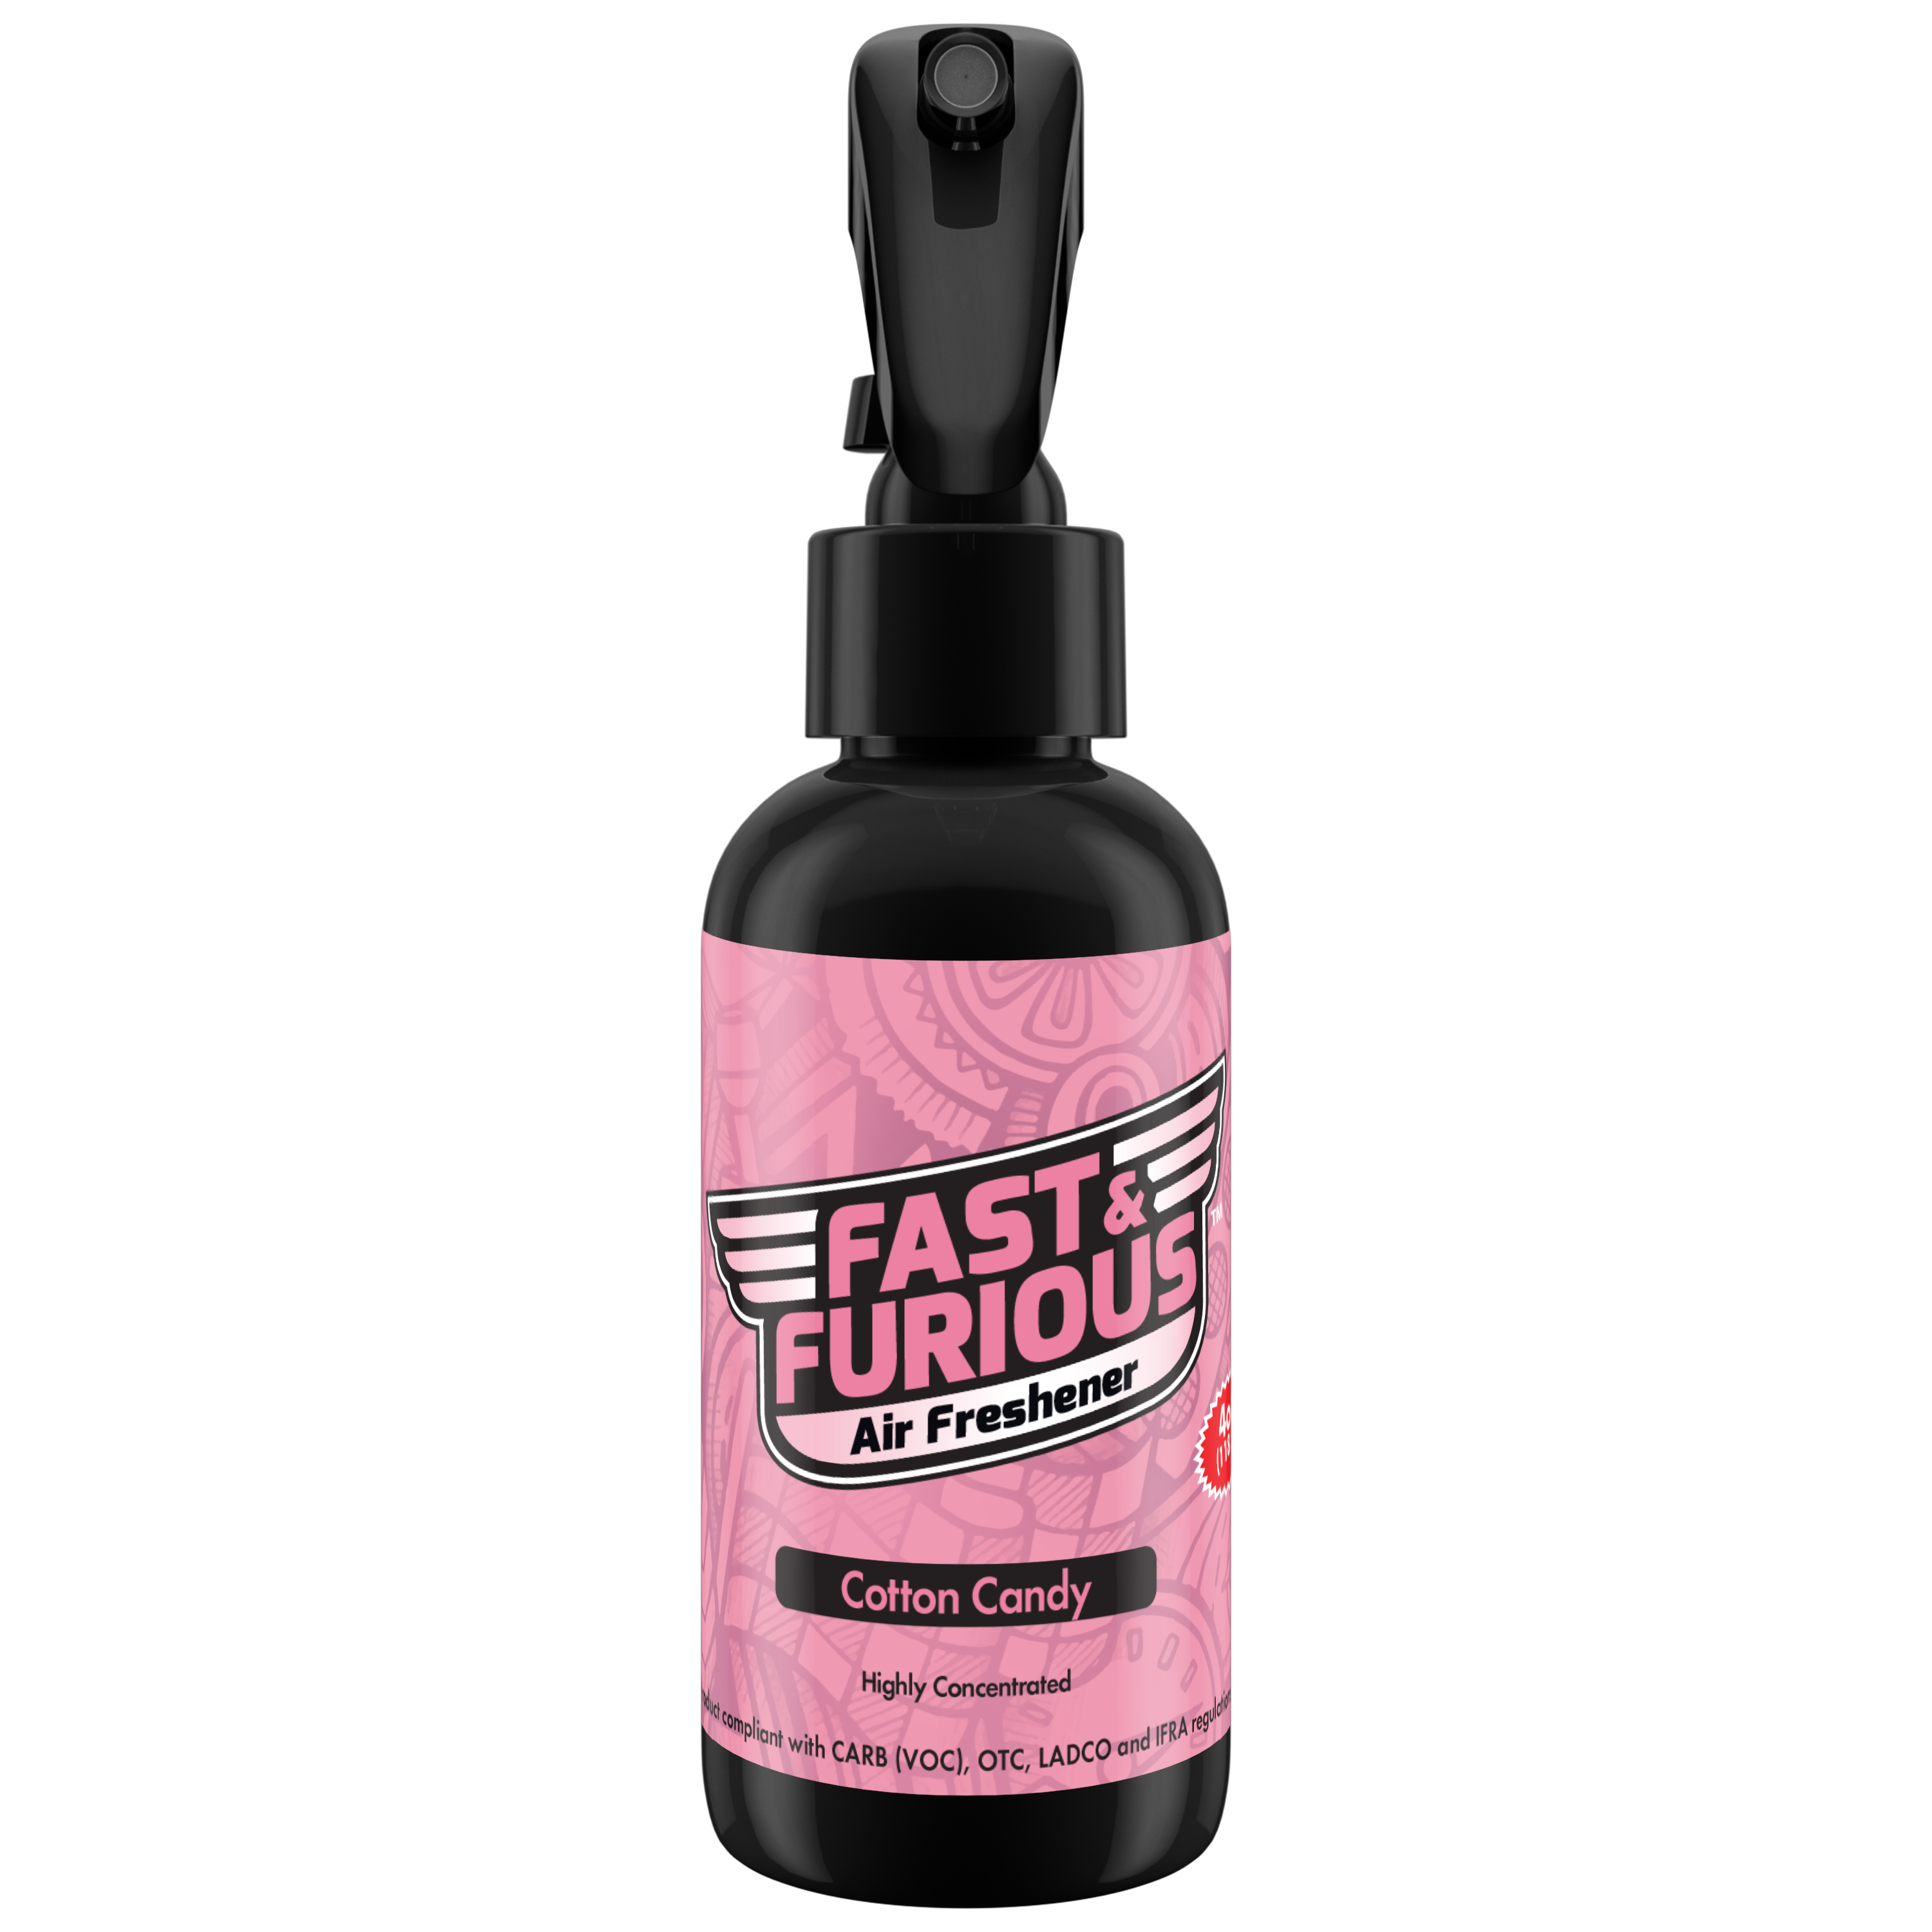 Fast and Furious Air Freshener - Cotton Candy Scent